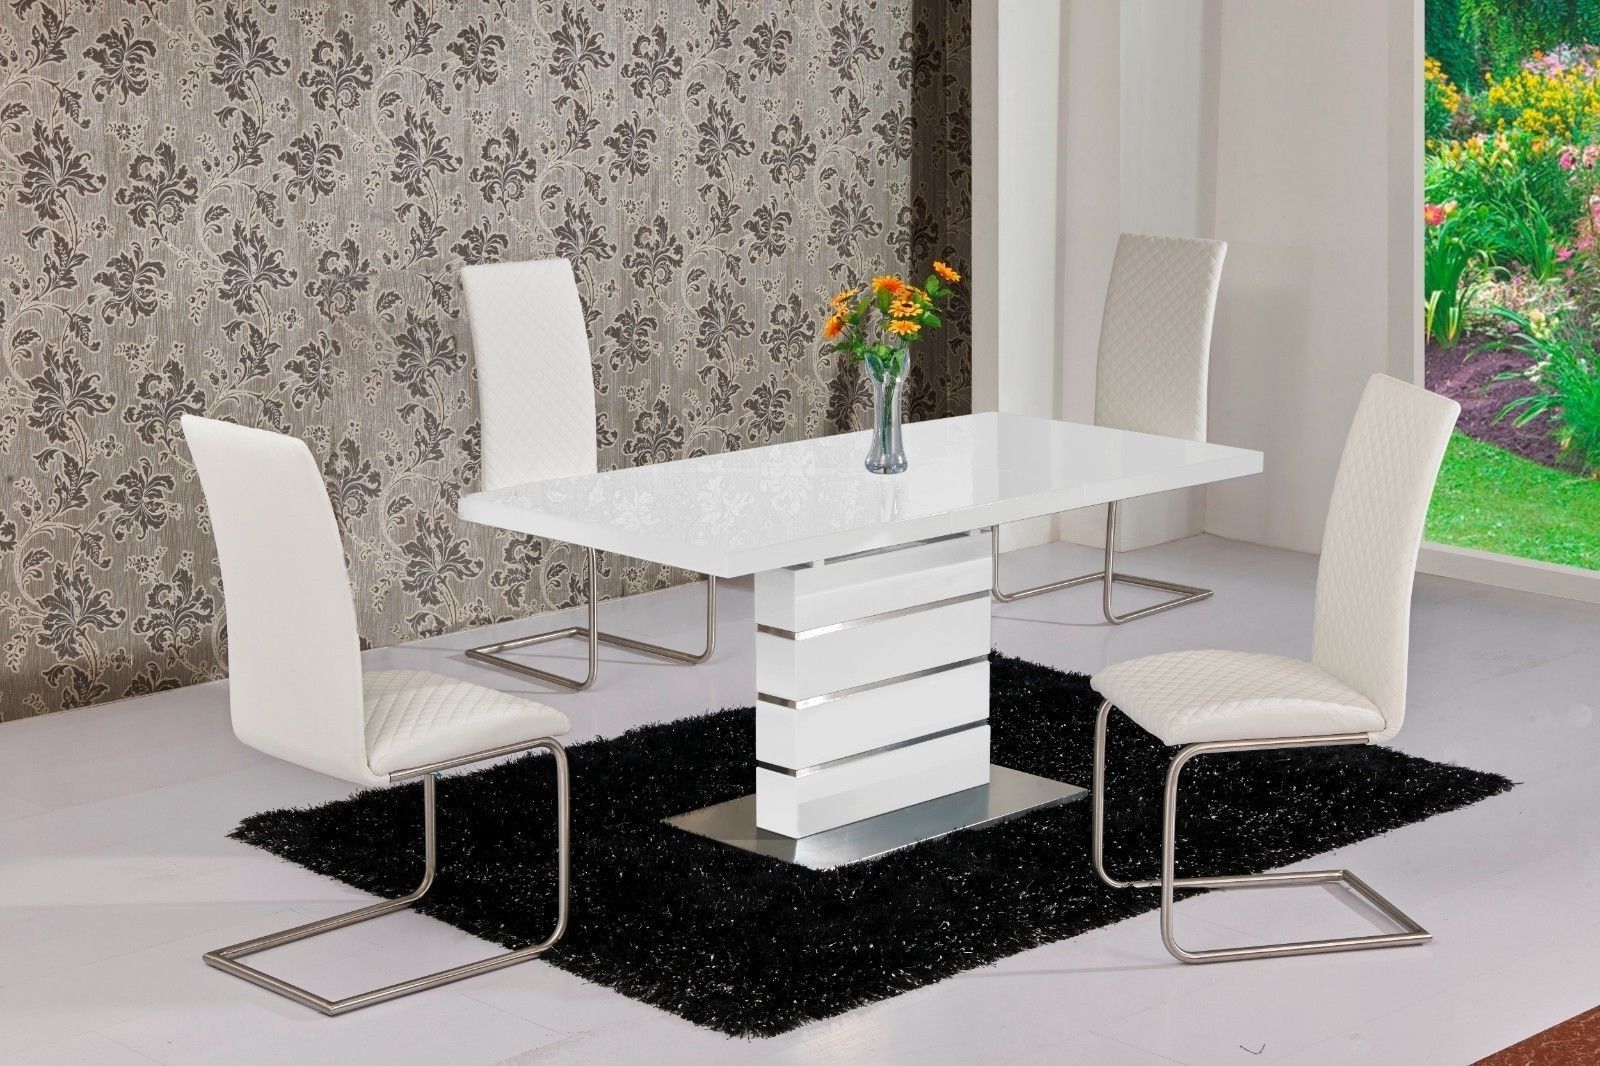 Mace High Gloss Extending 120 160 Dining Table & Chair Set – White Regarding 2018 Dining Extending Tables And Chairs (View 1 of 25)